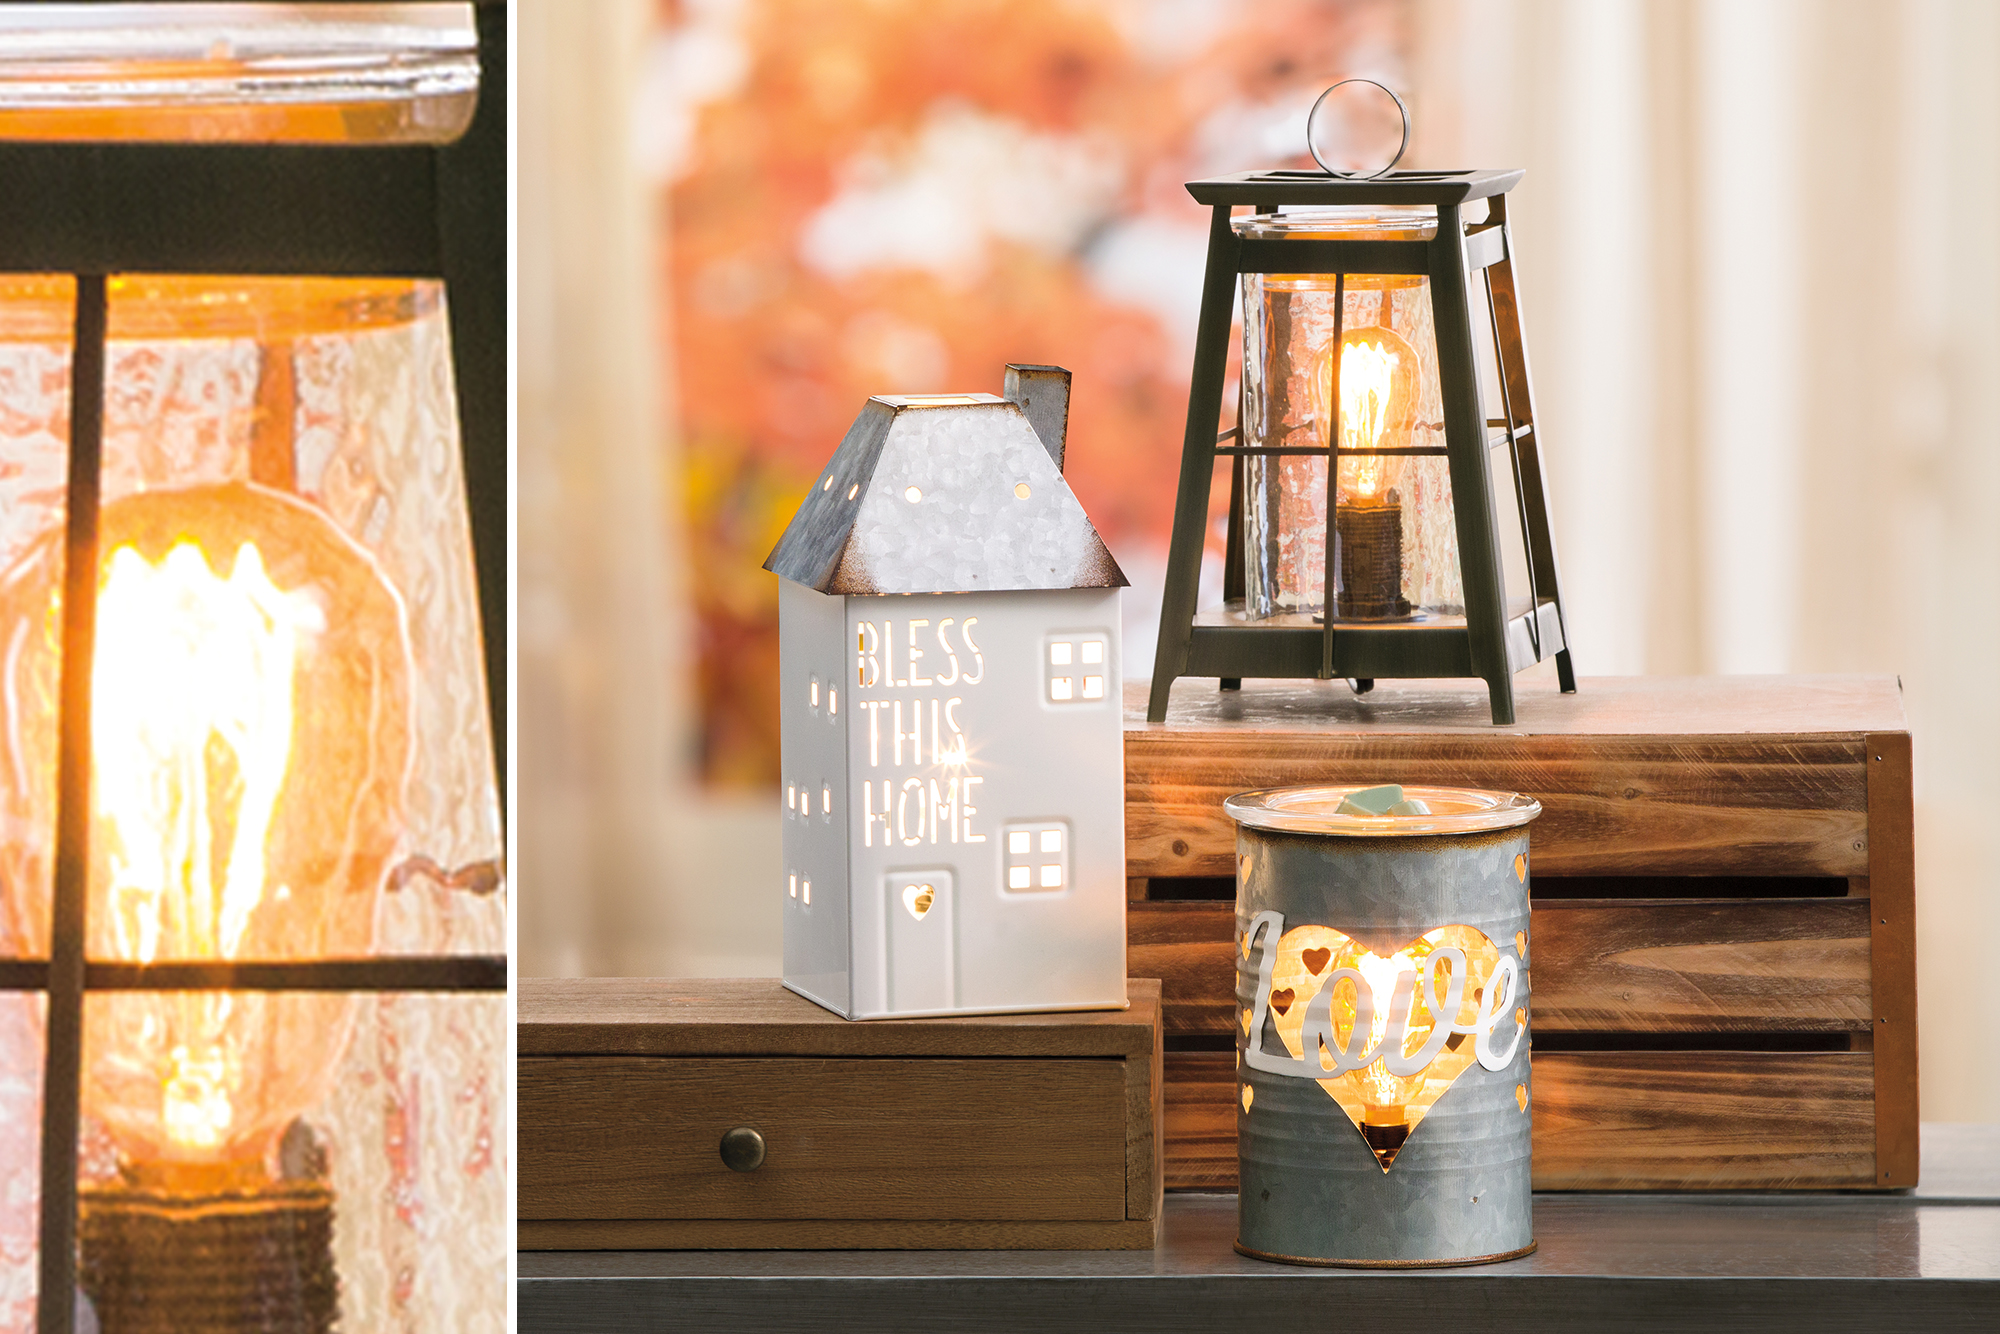 Three of the Scentsy rustic farmhouse style wax warmers including Sweet Love Warmer, Bless this Home Warmer and Shining Light Wax Warmer